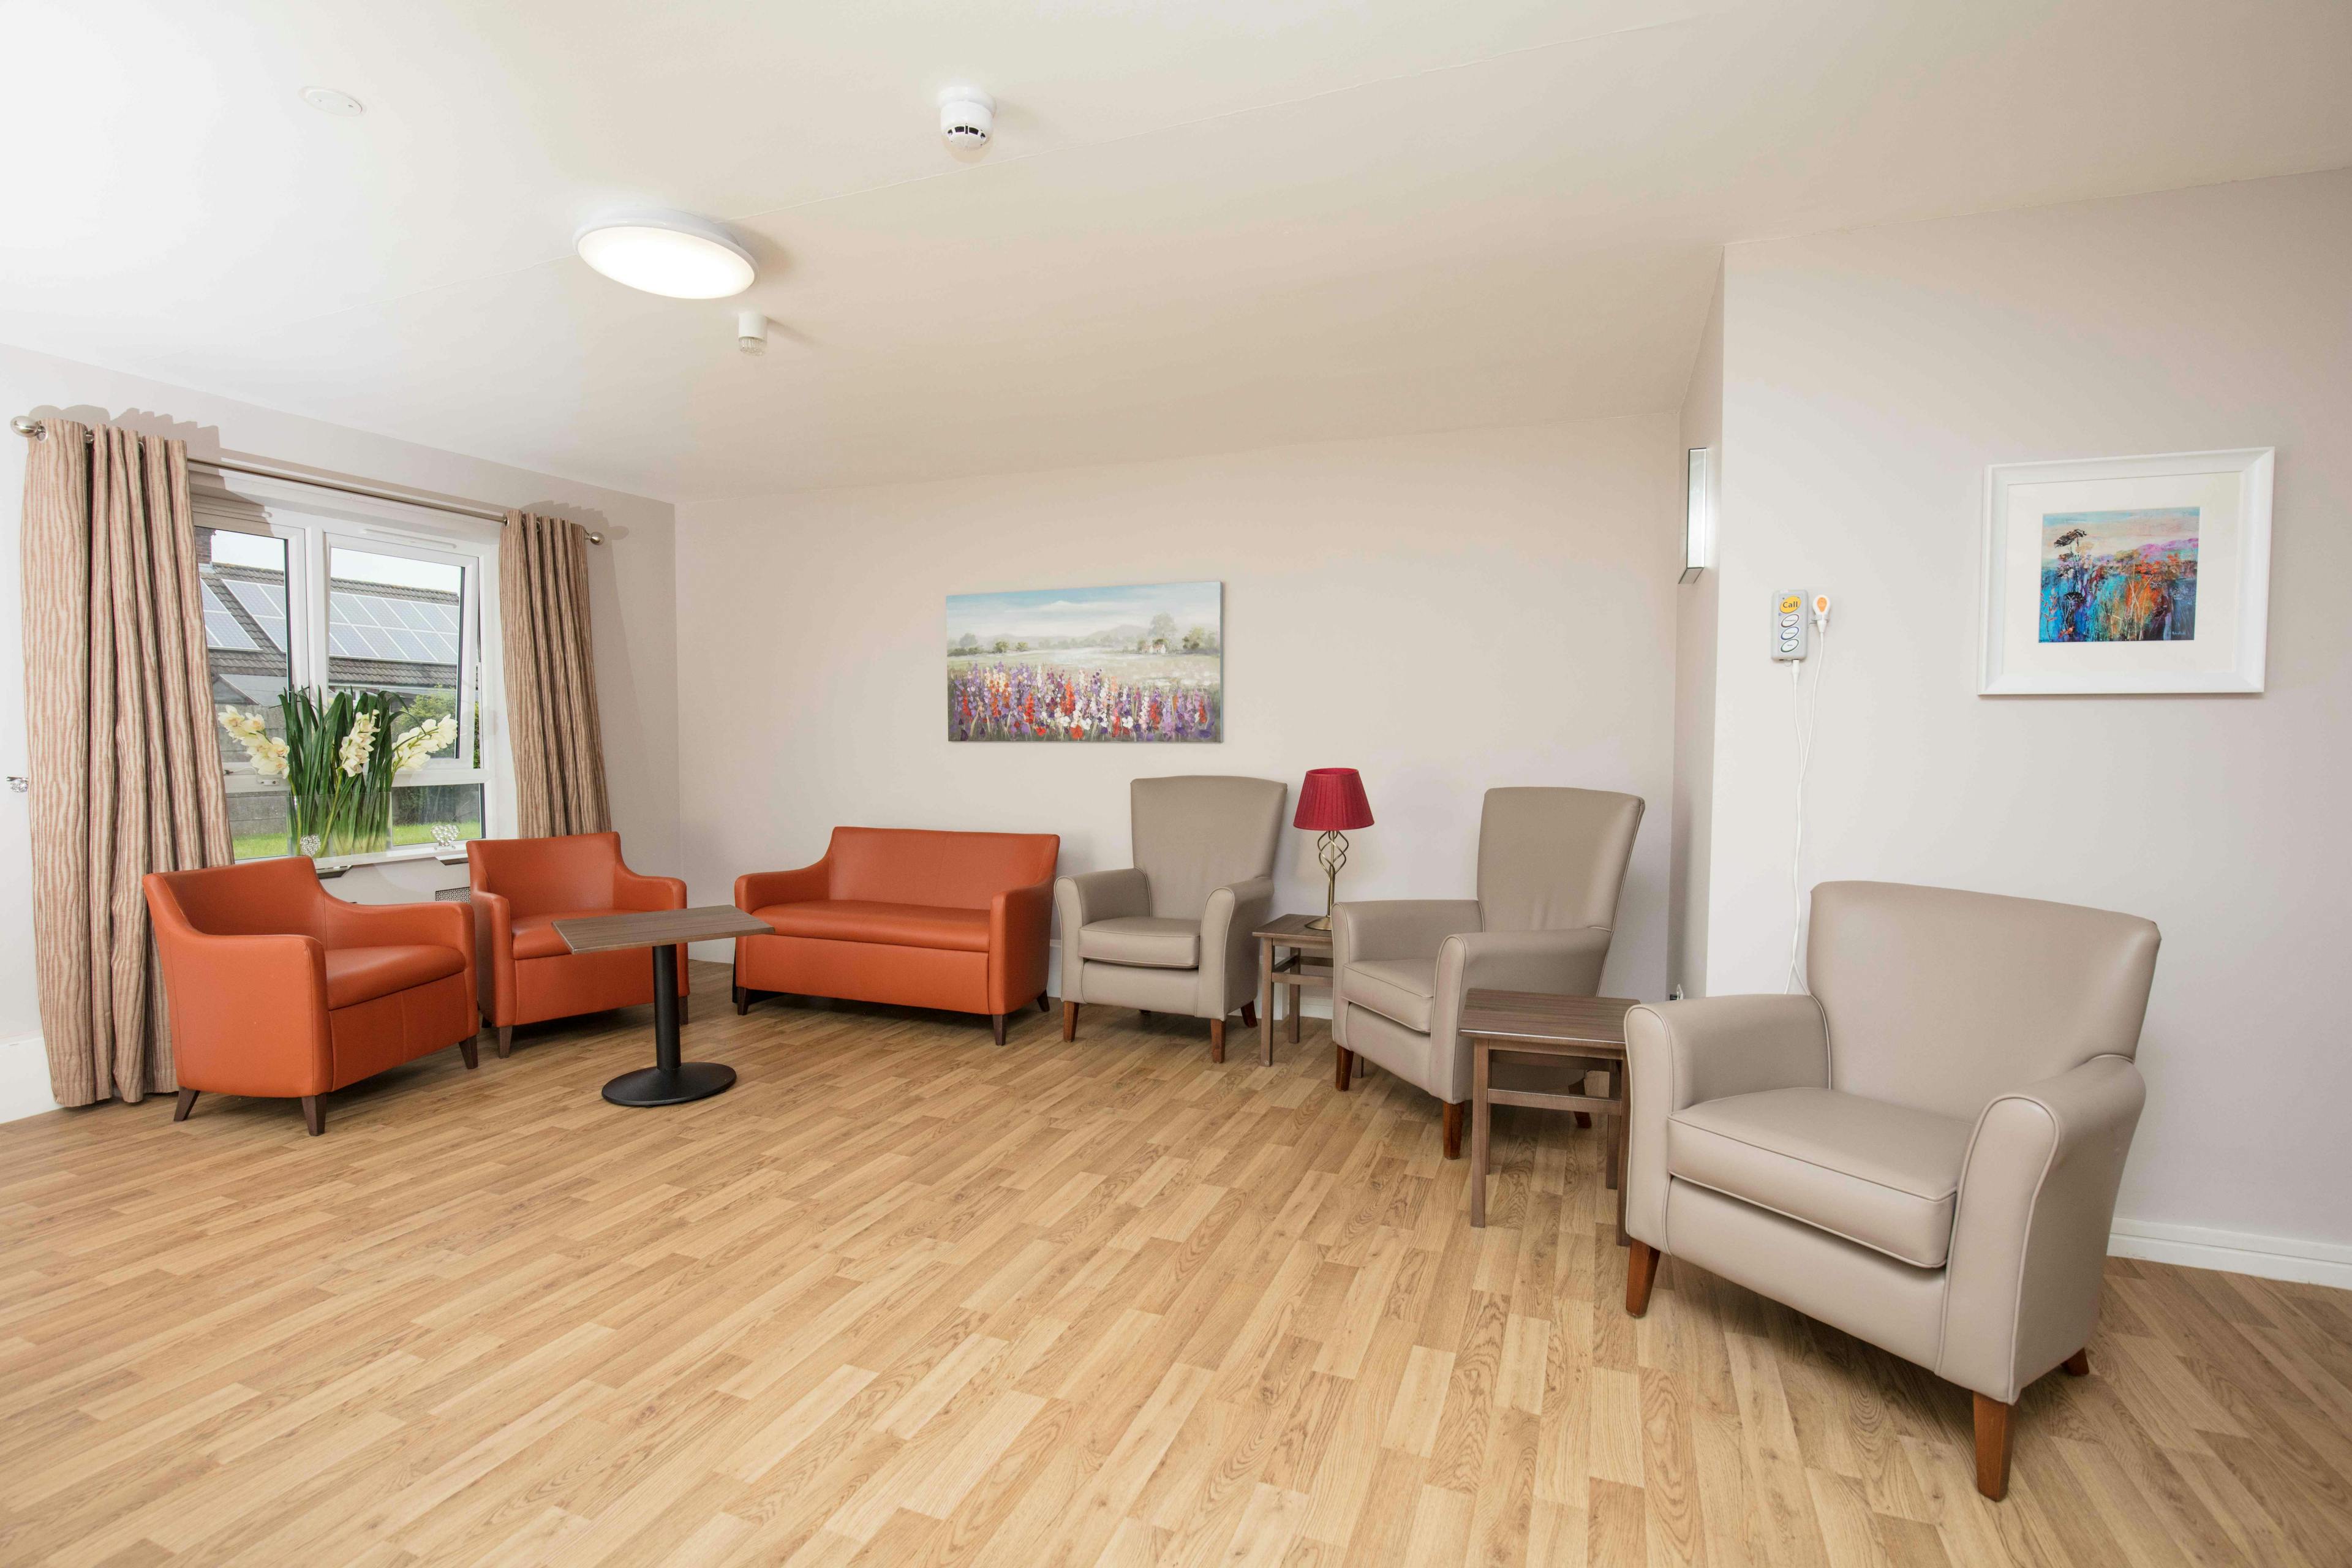 Minster Care Group - Garswood House care home 1